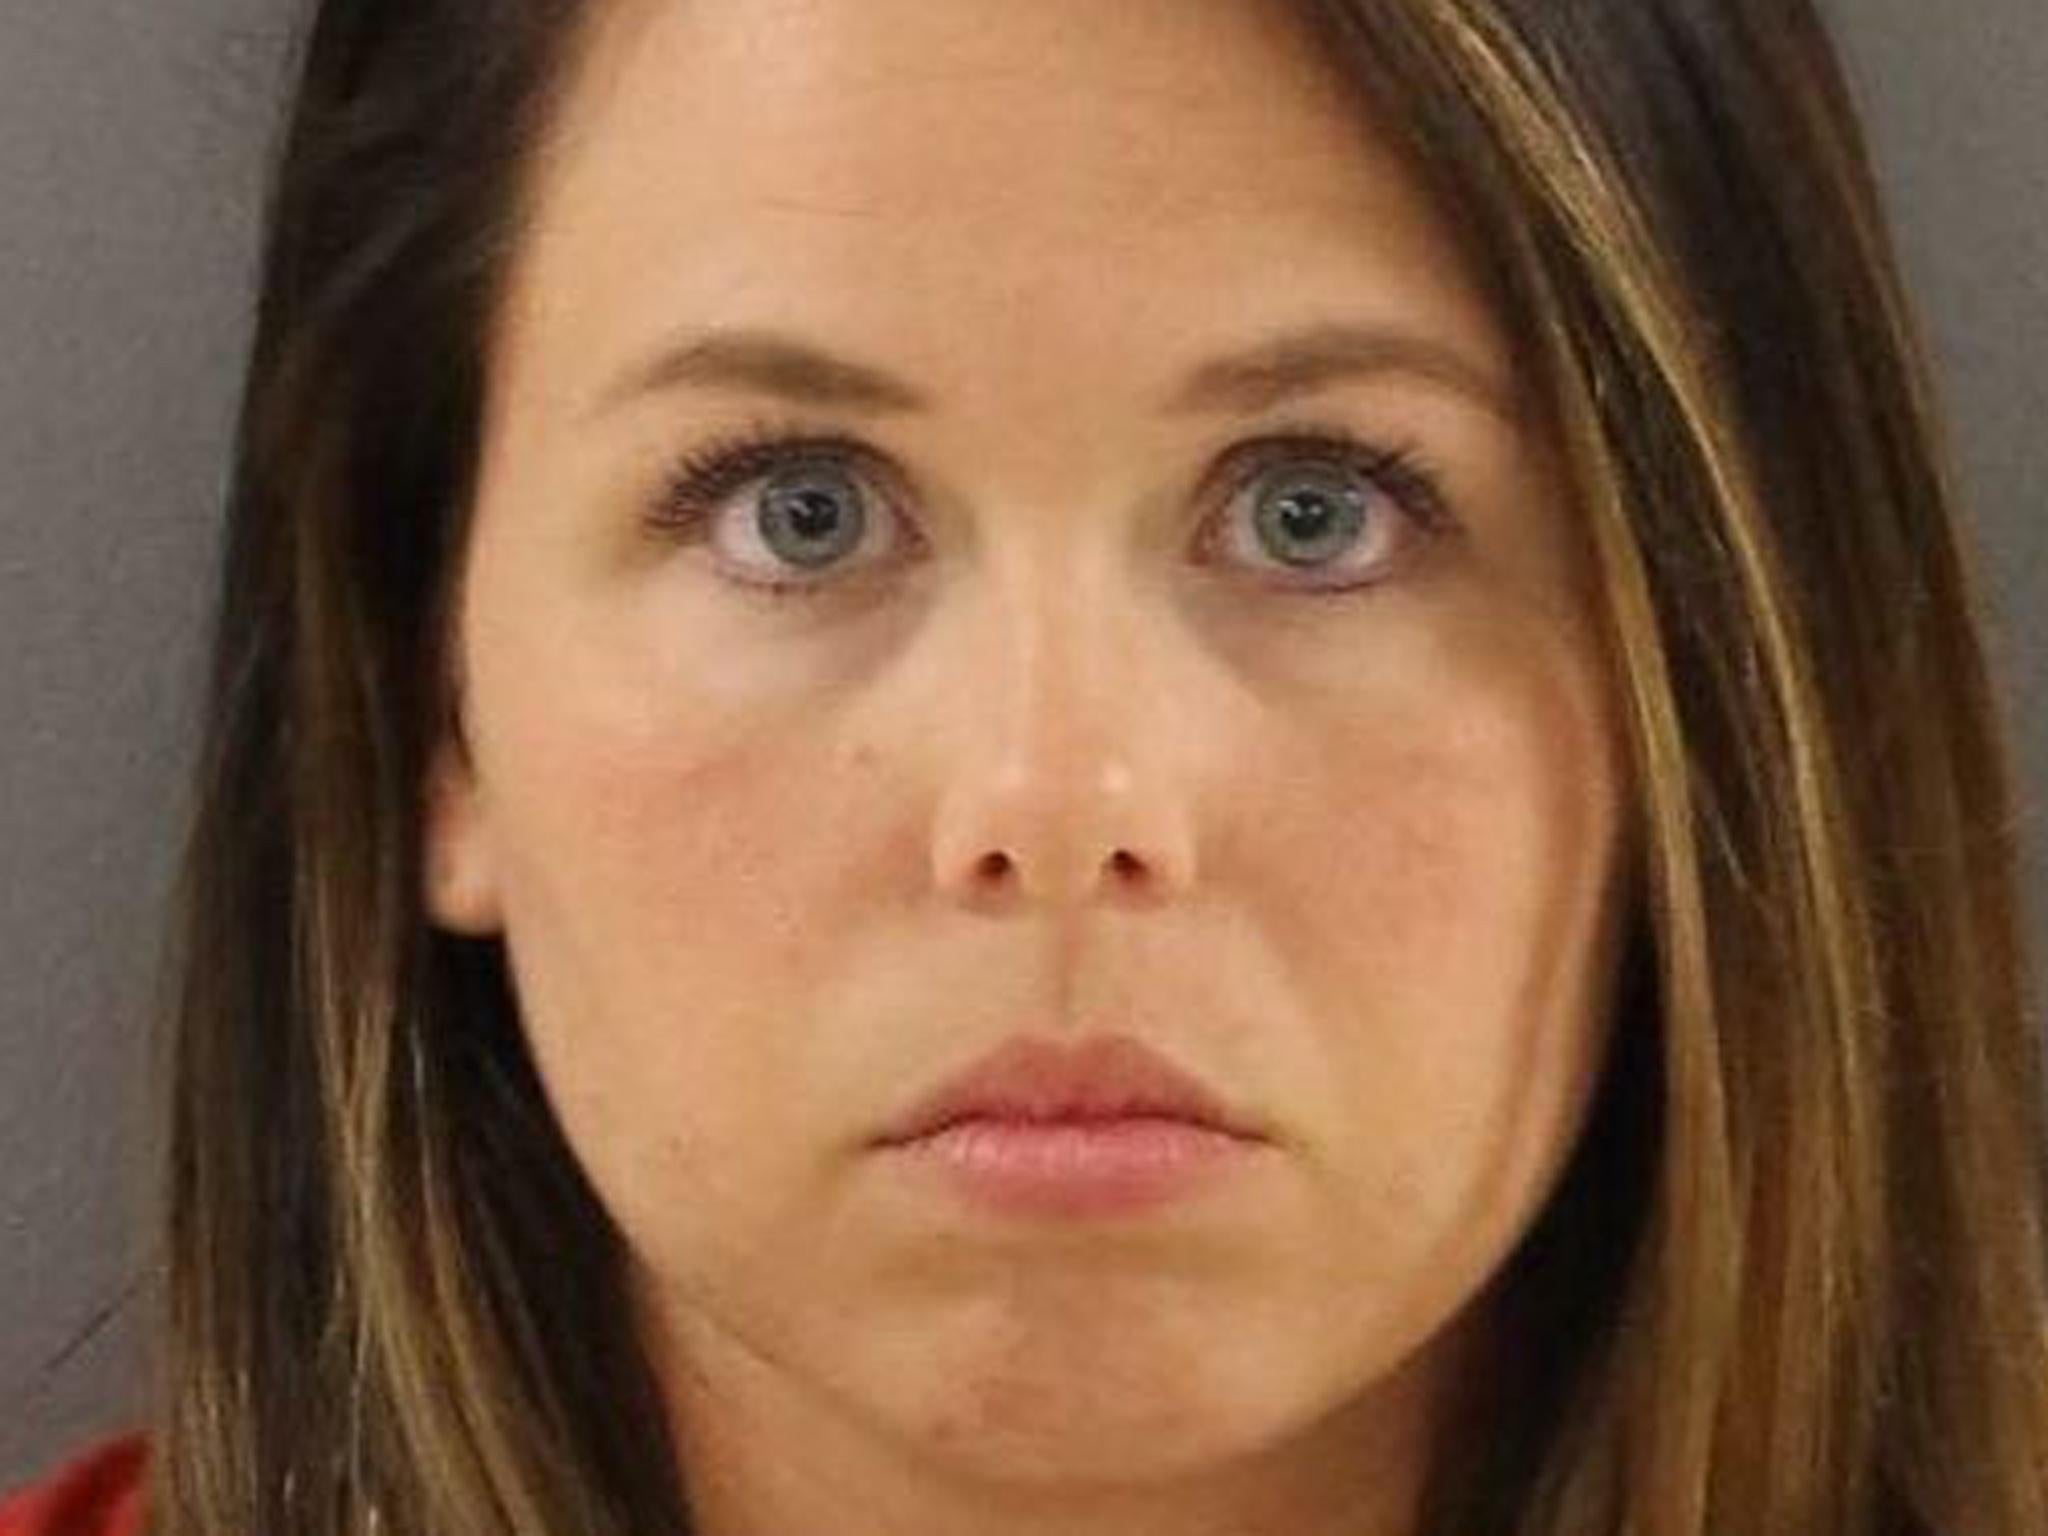 High school football coachs wife pleads guilty to having sex with 16-year- old team member The Independent The Independent pic